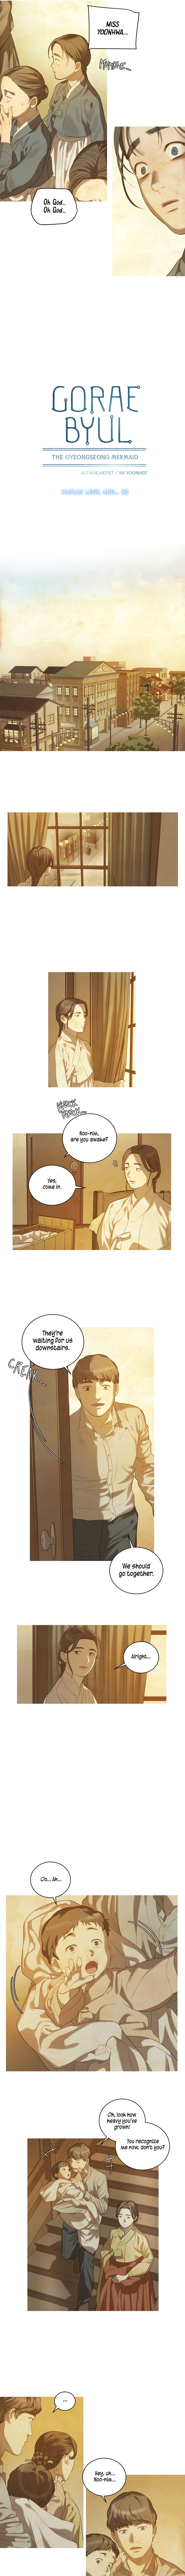 Gorae Byul - The Gyeongseong Mermaid - Chapter 14 Page 4